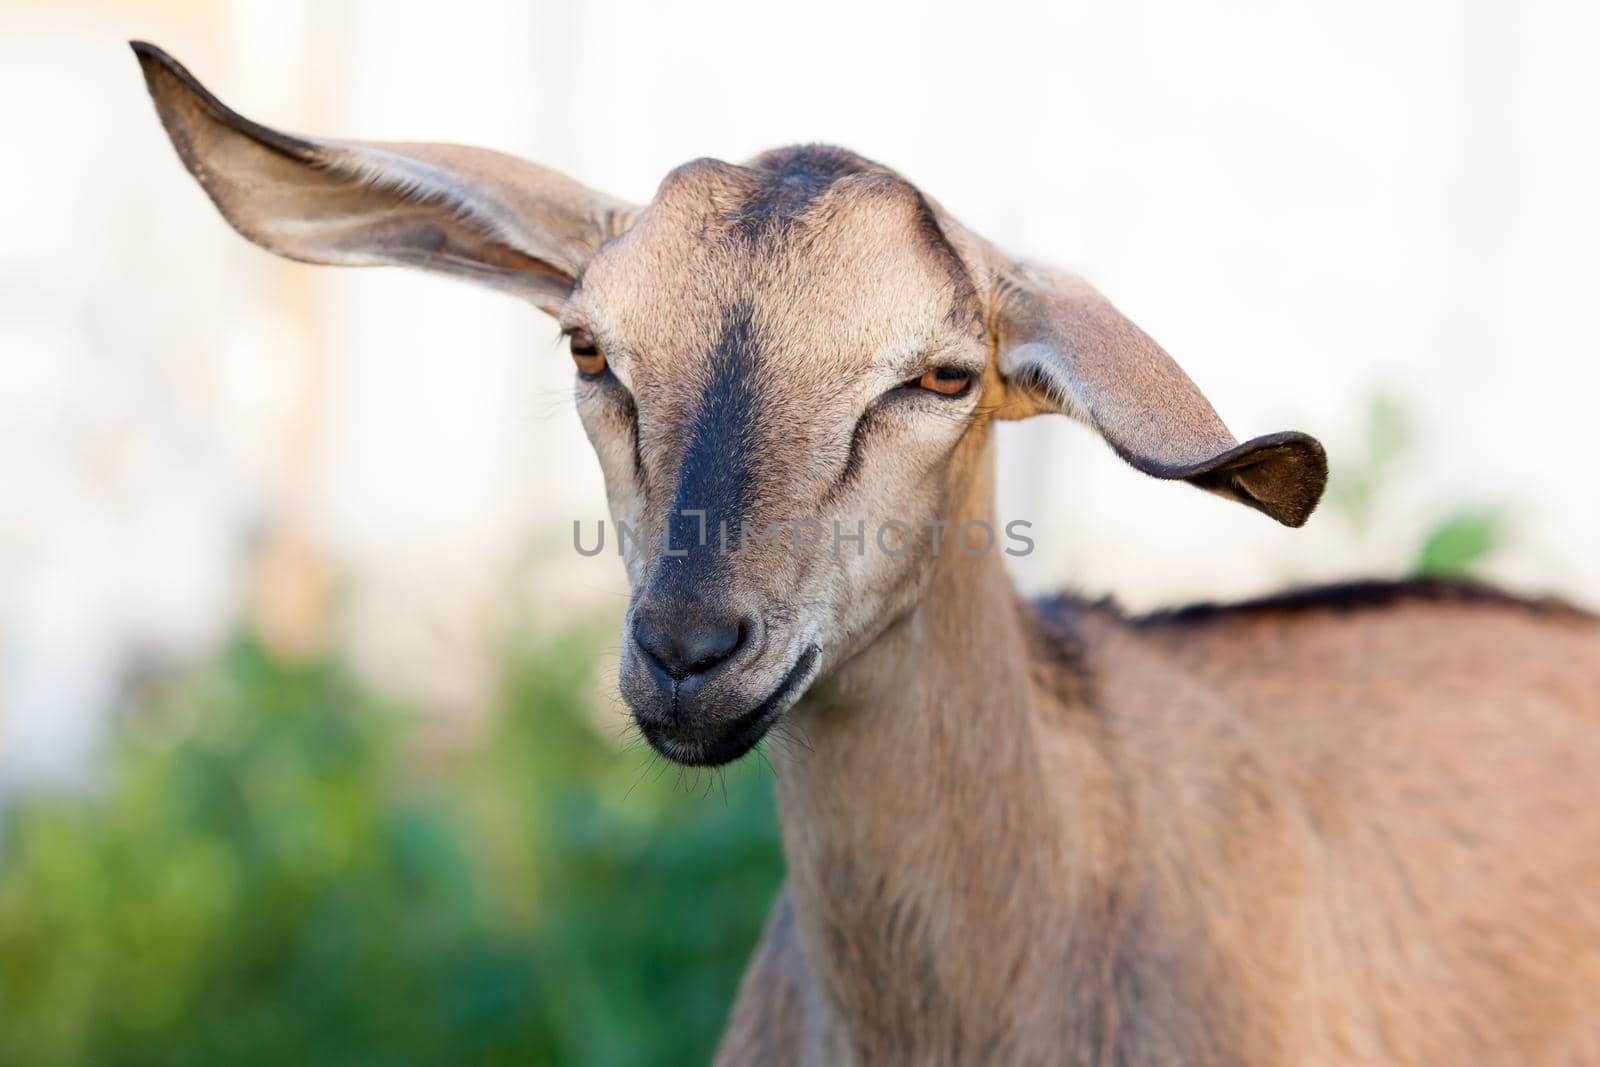 One brown Anglo-Nubian goat with very large ears portrait